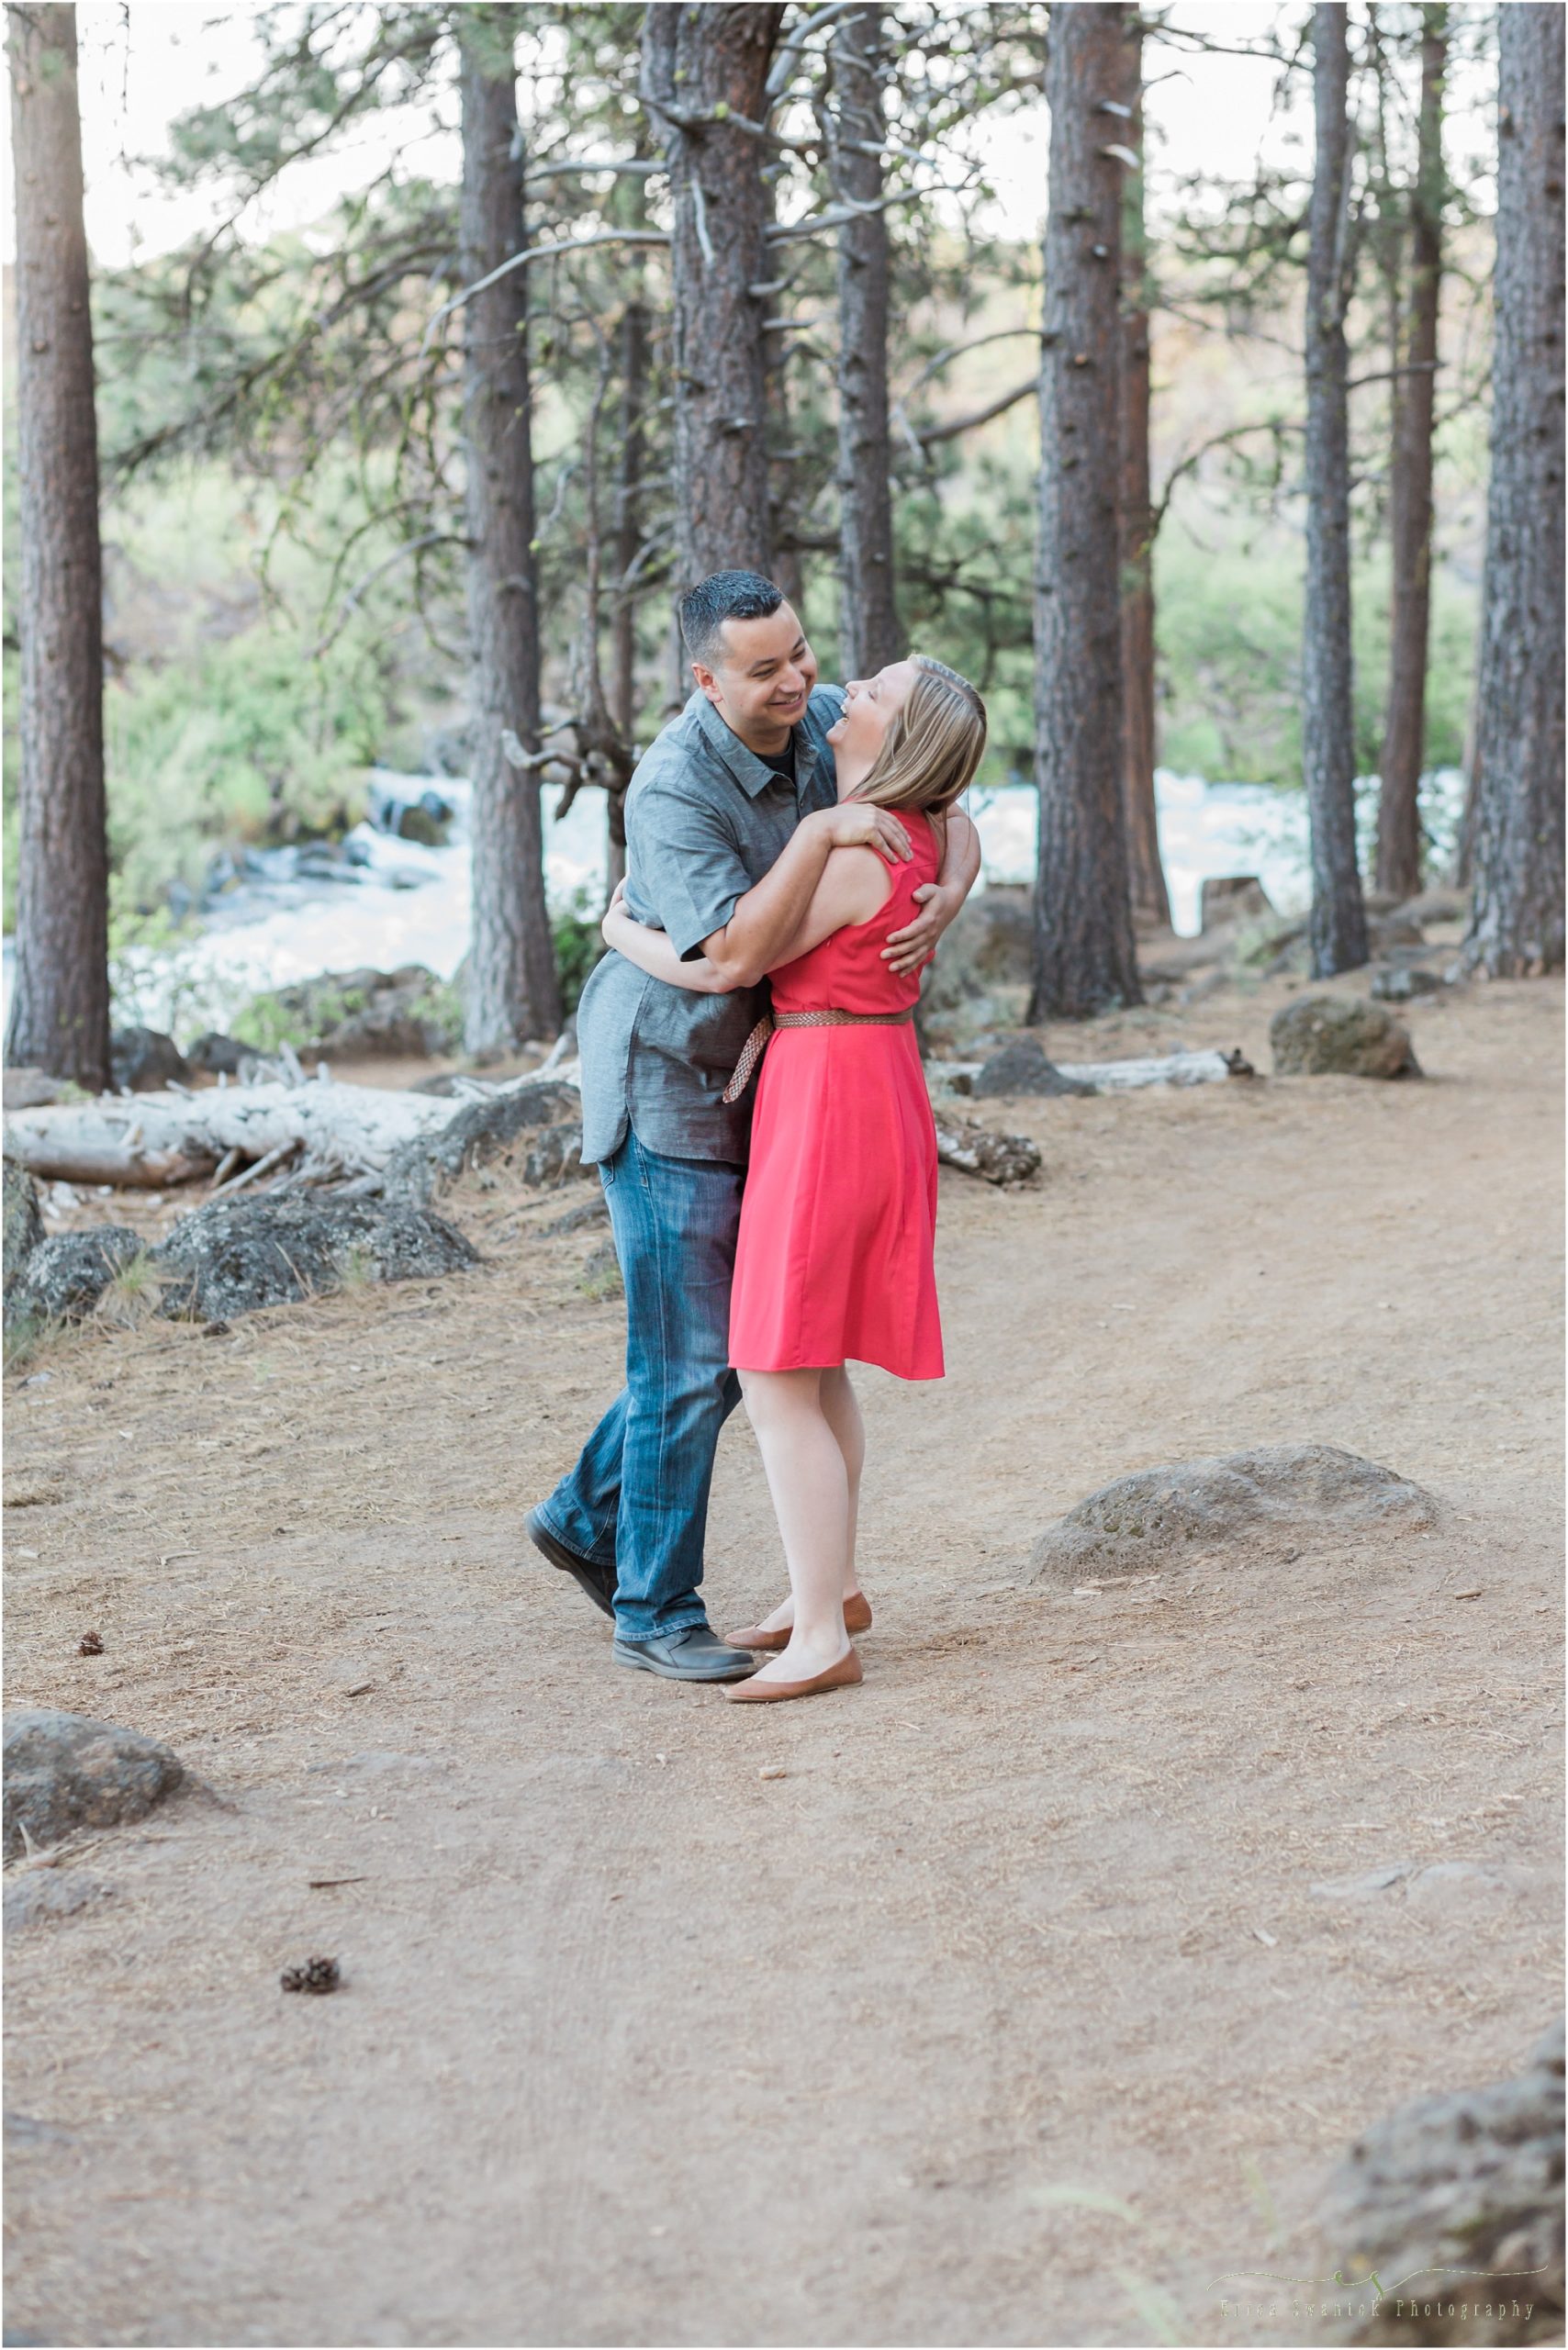 A couple falls over each other in laughter during their engagement photo shoot by Bend, OR photographer Erica Swantek. 